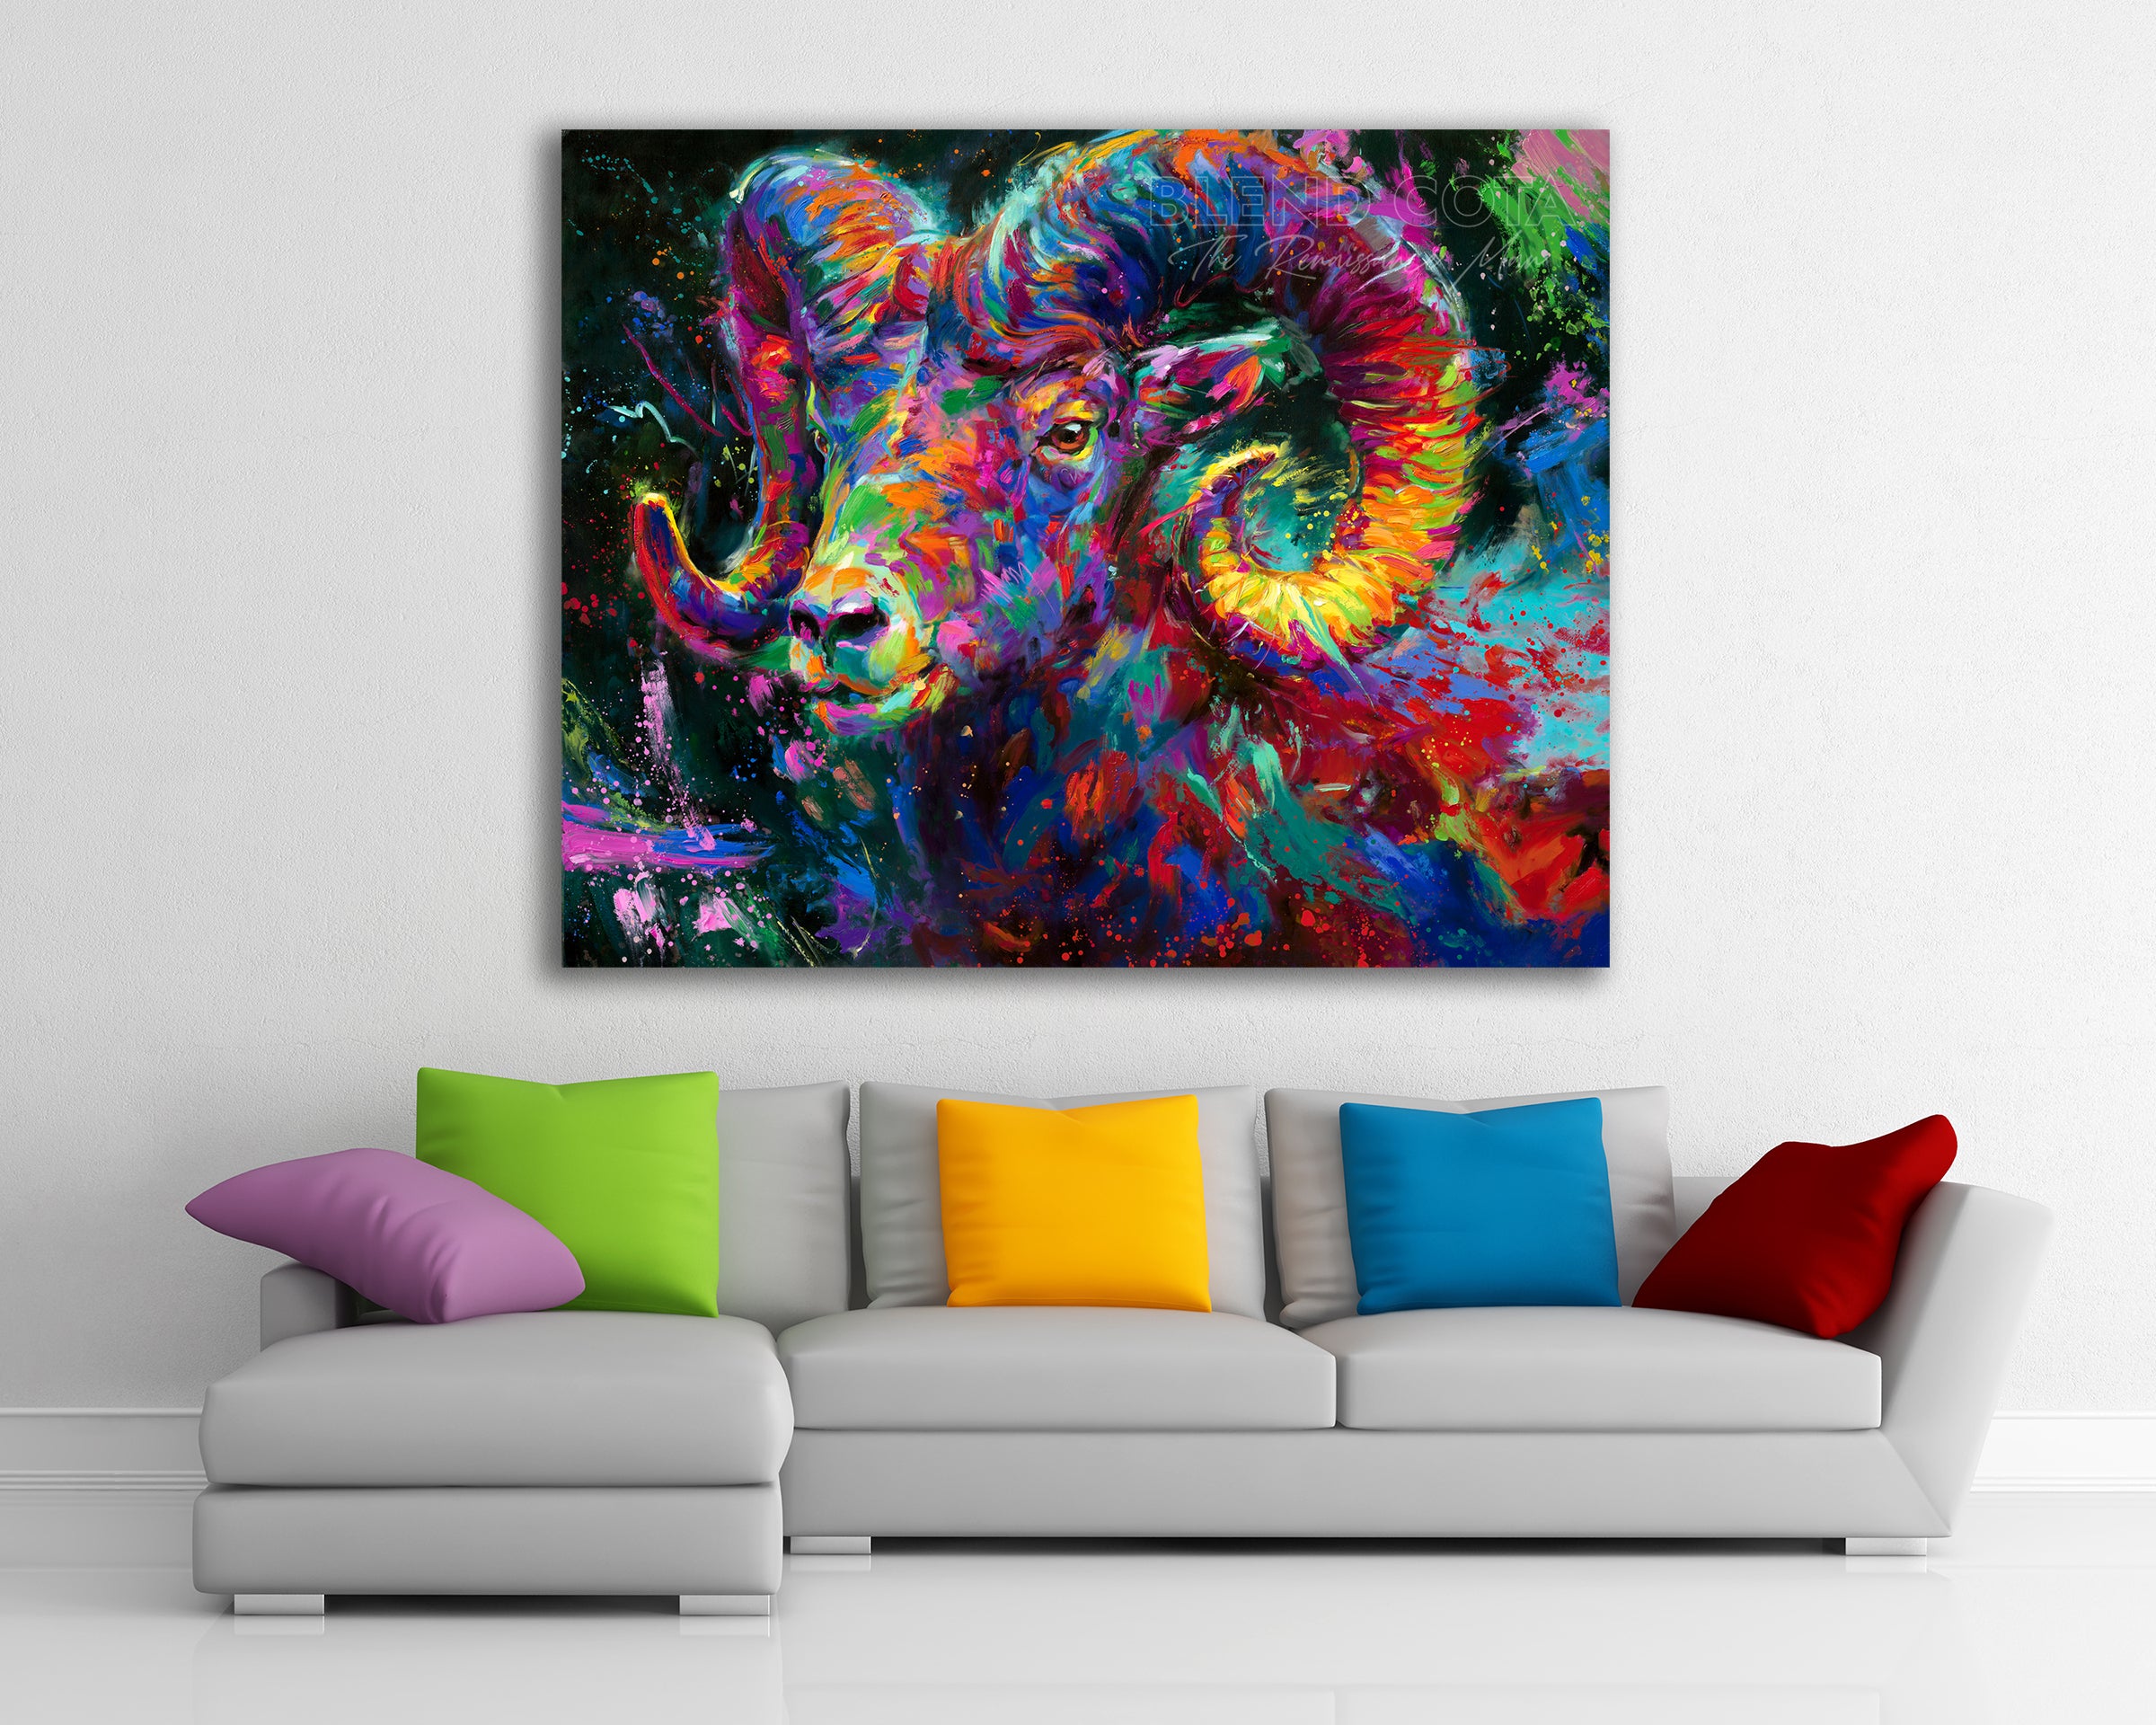 The Ram Spirit painted by Blend Cota Limited Edition Art on Metal from Blend Cota Studios with the painting hanging on a white wall behind a colorful couch